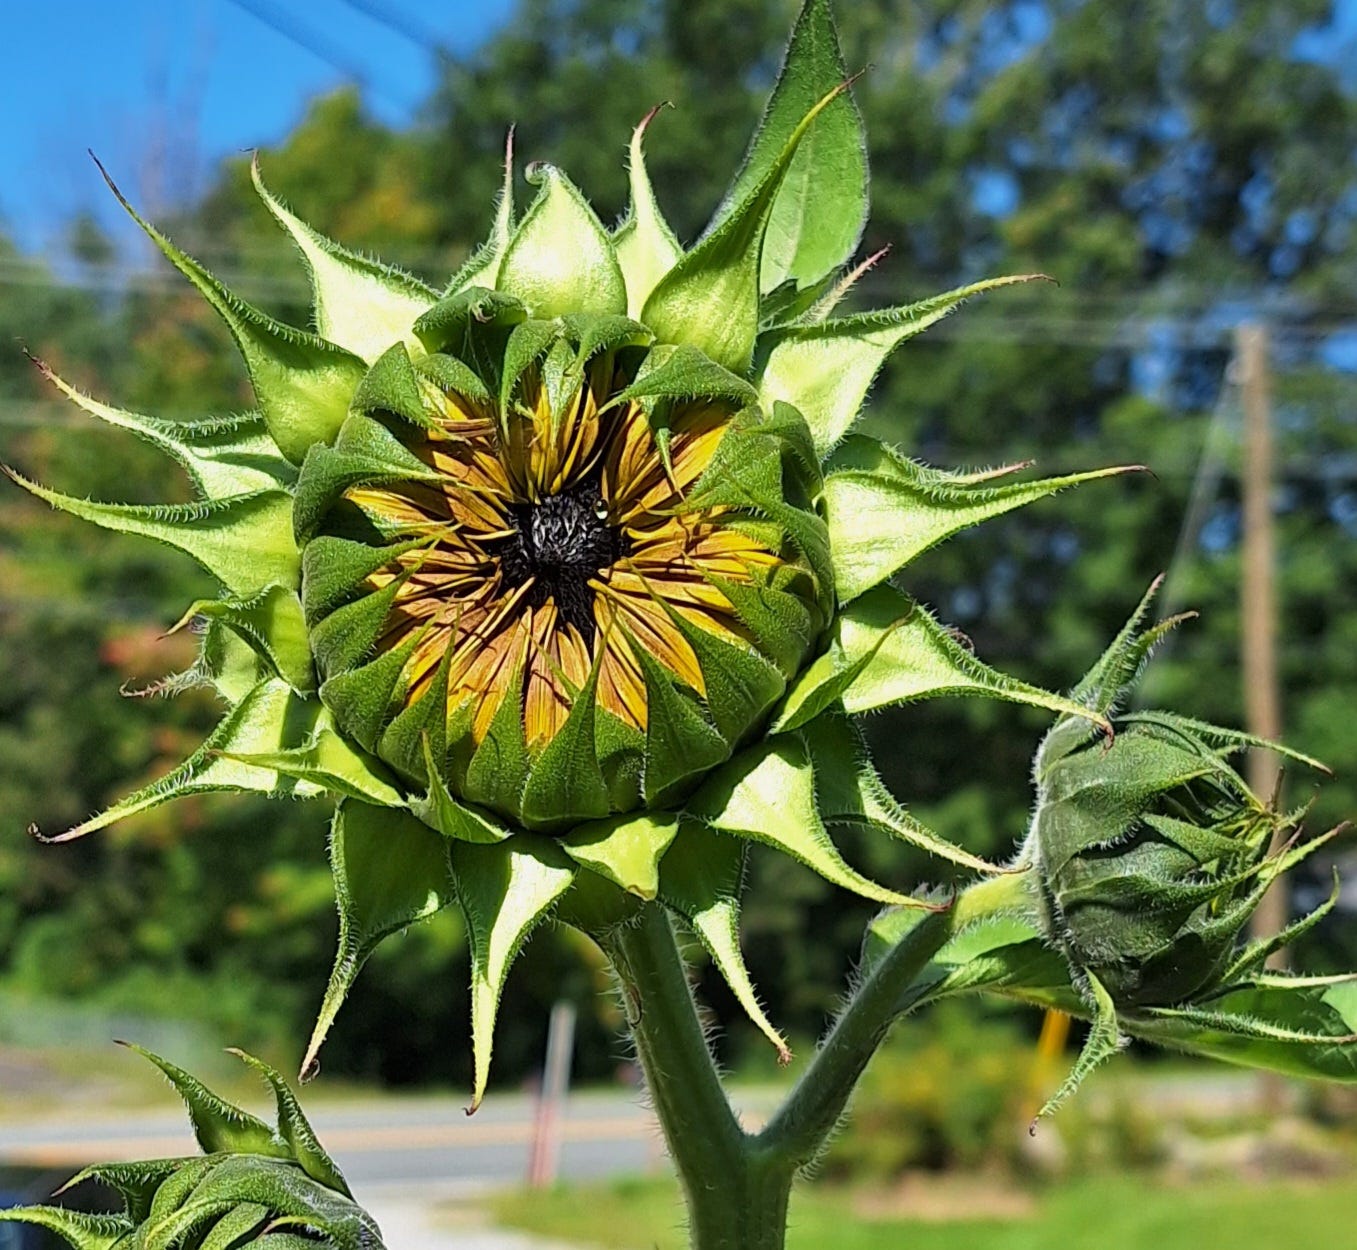 A sunflower in my yard about to bloom.